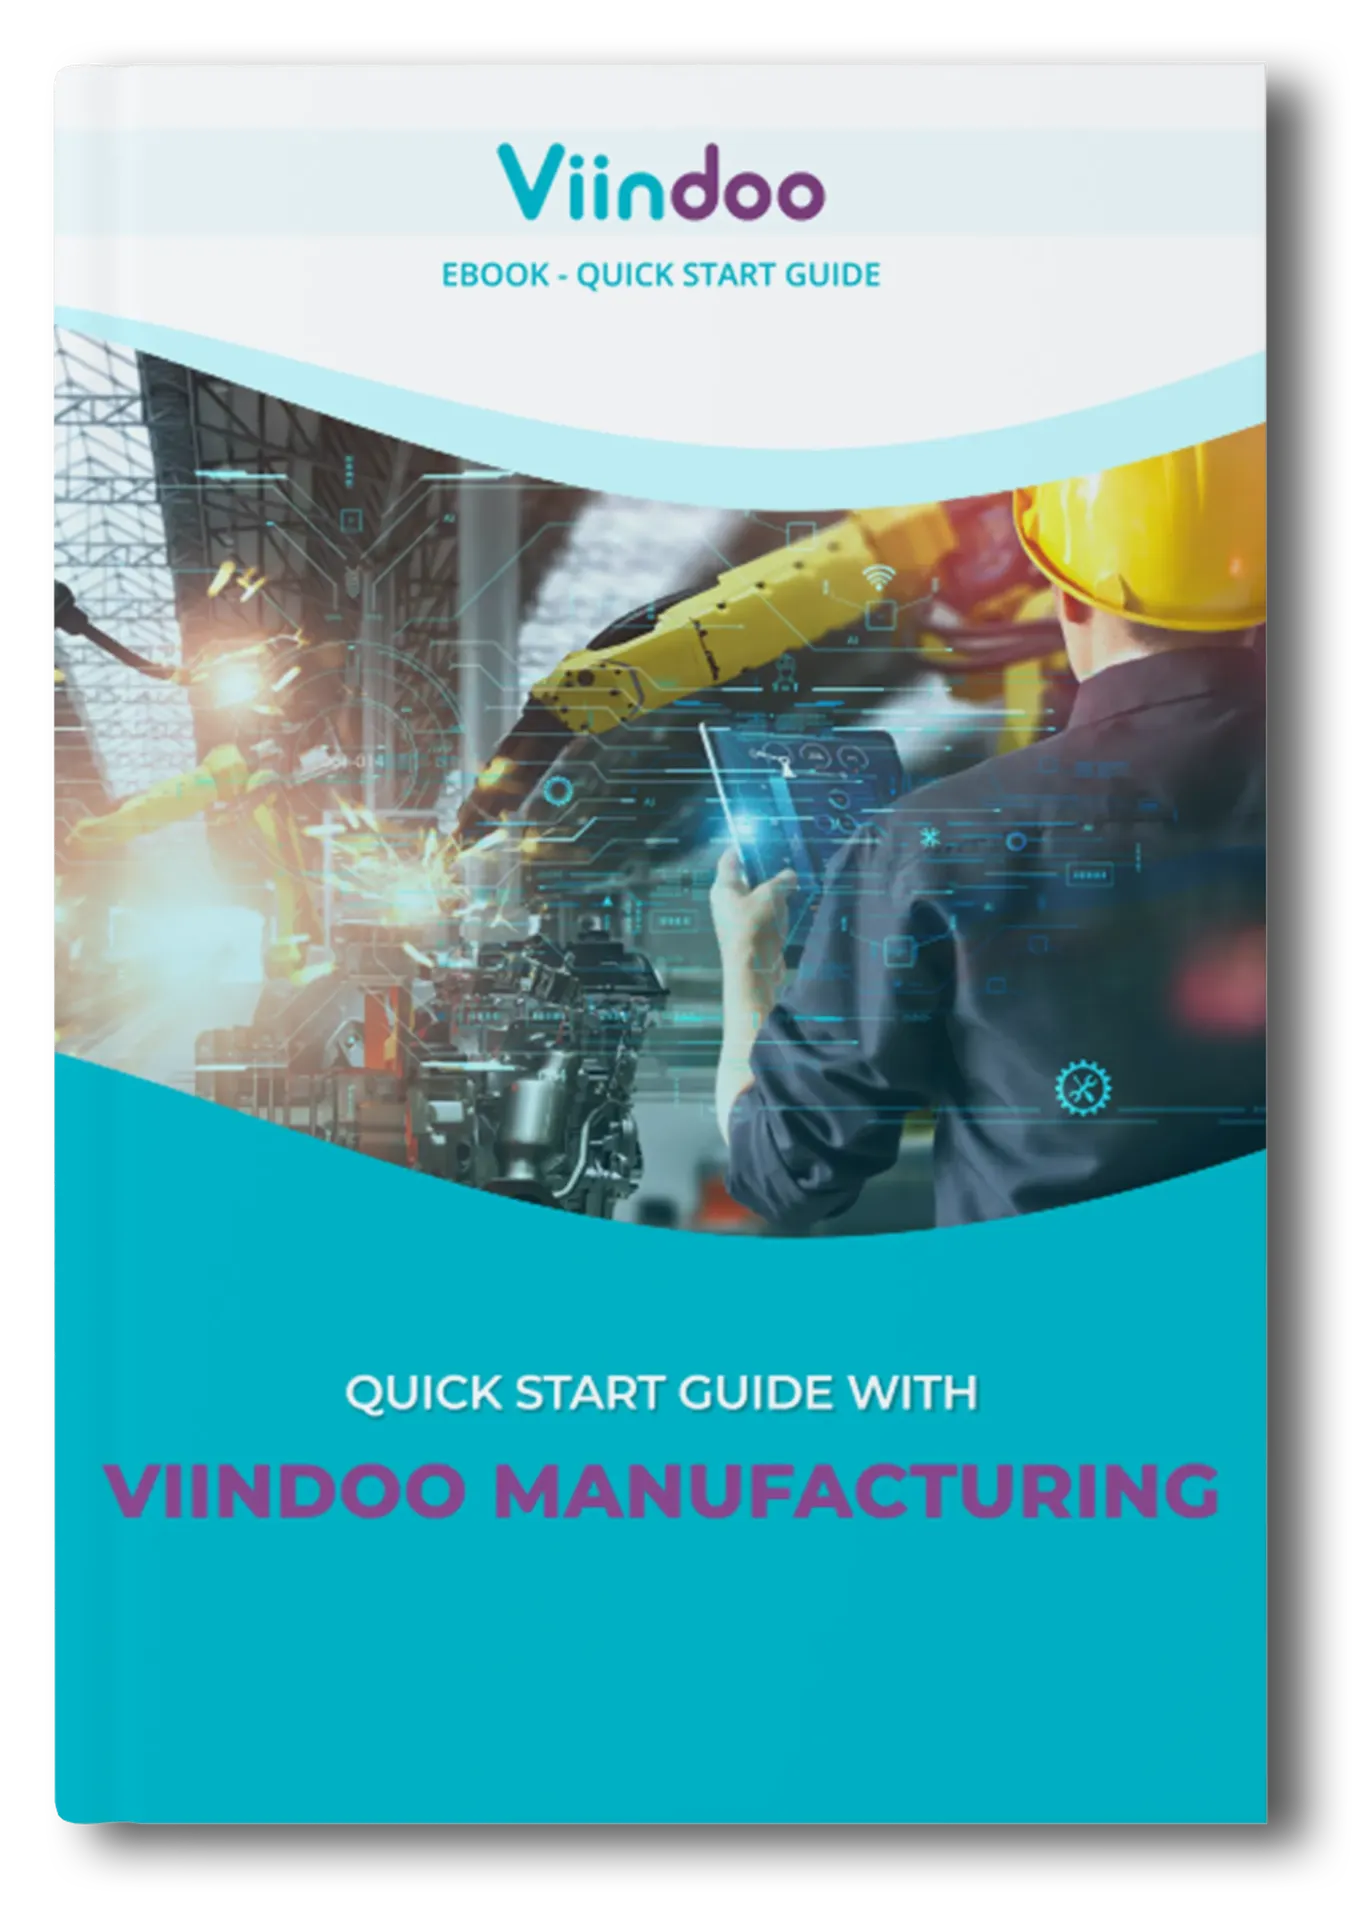 Quick Start Guide with Viindoo Manufacturing